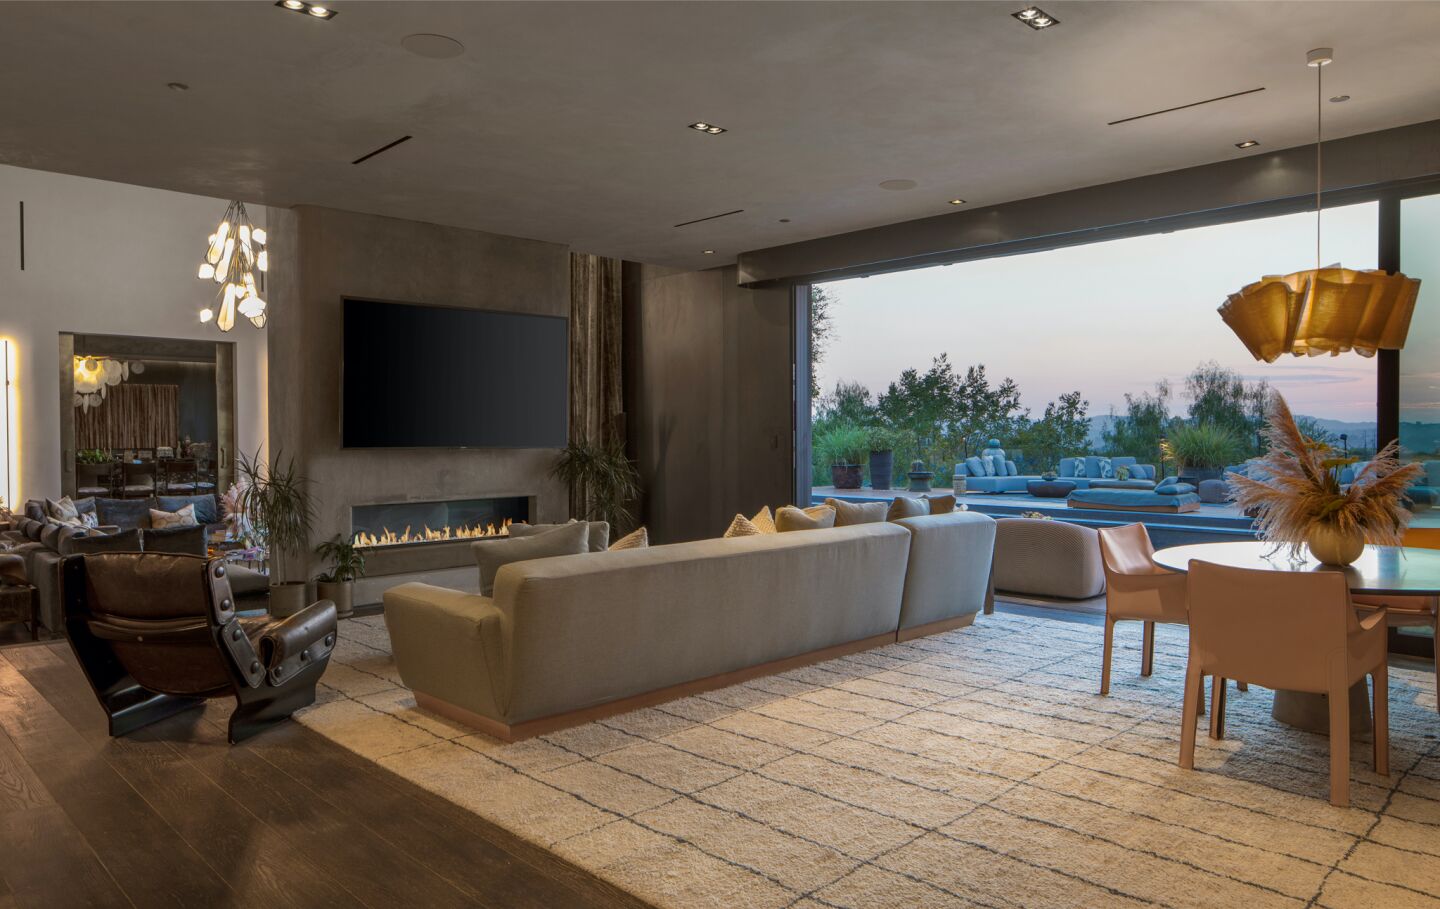 The living room has ceiling to floor windows and modern furnishings.